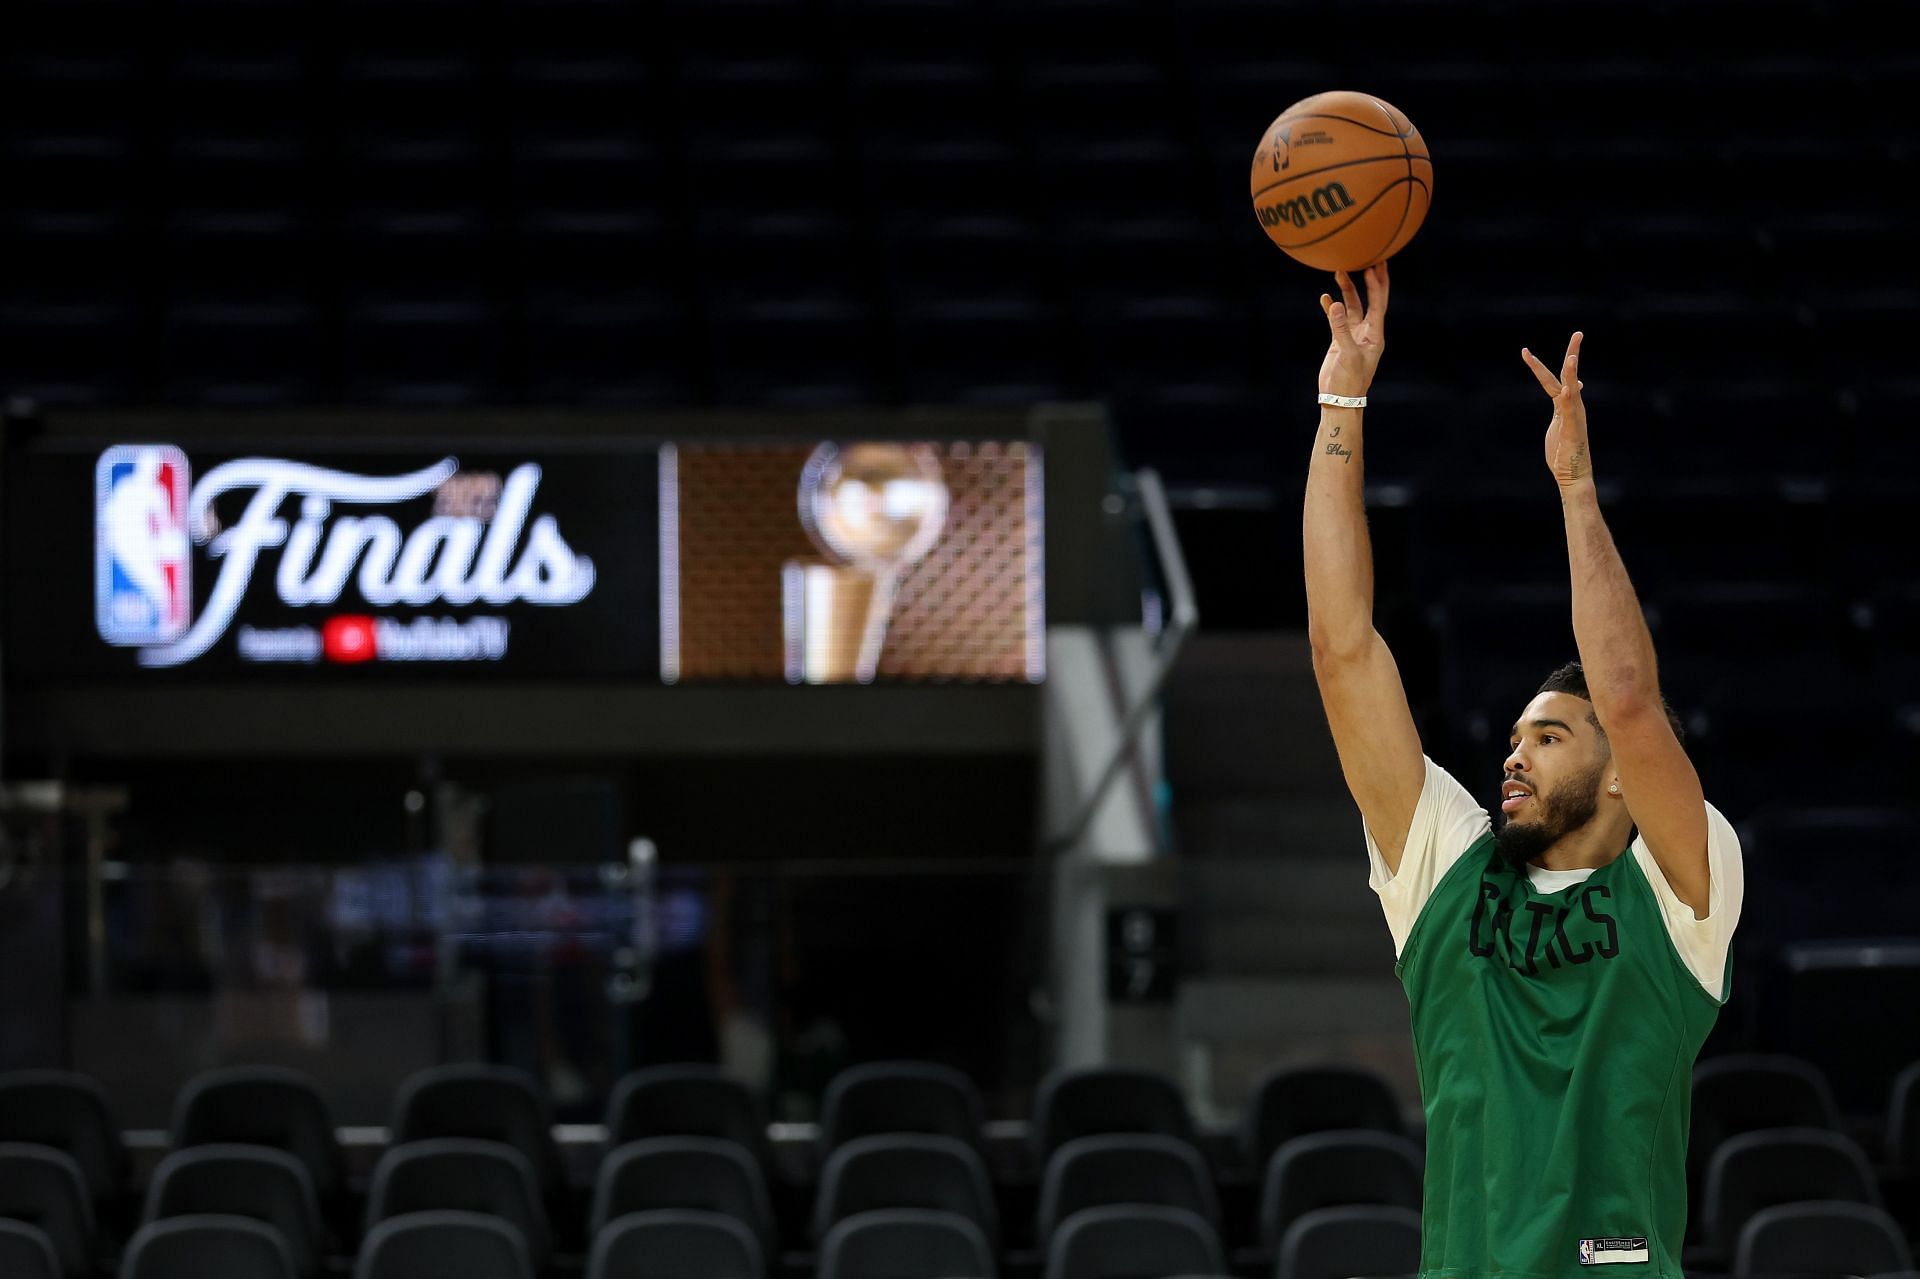 Jayson Tatum warms up before the NBA Finals Media Day